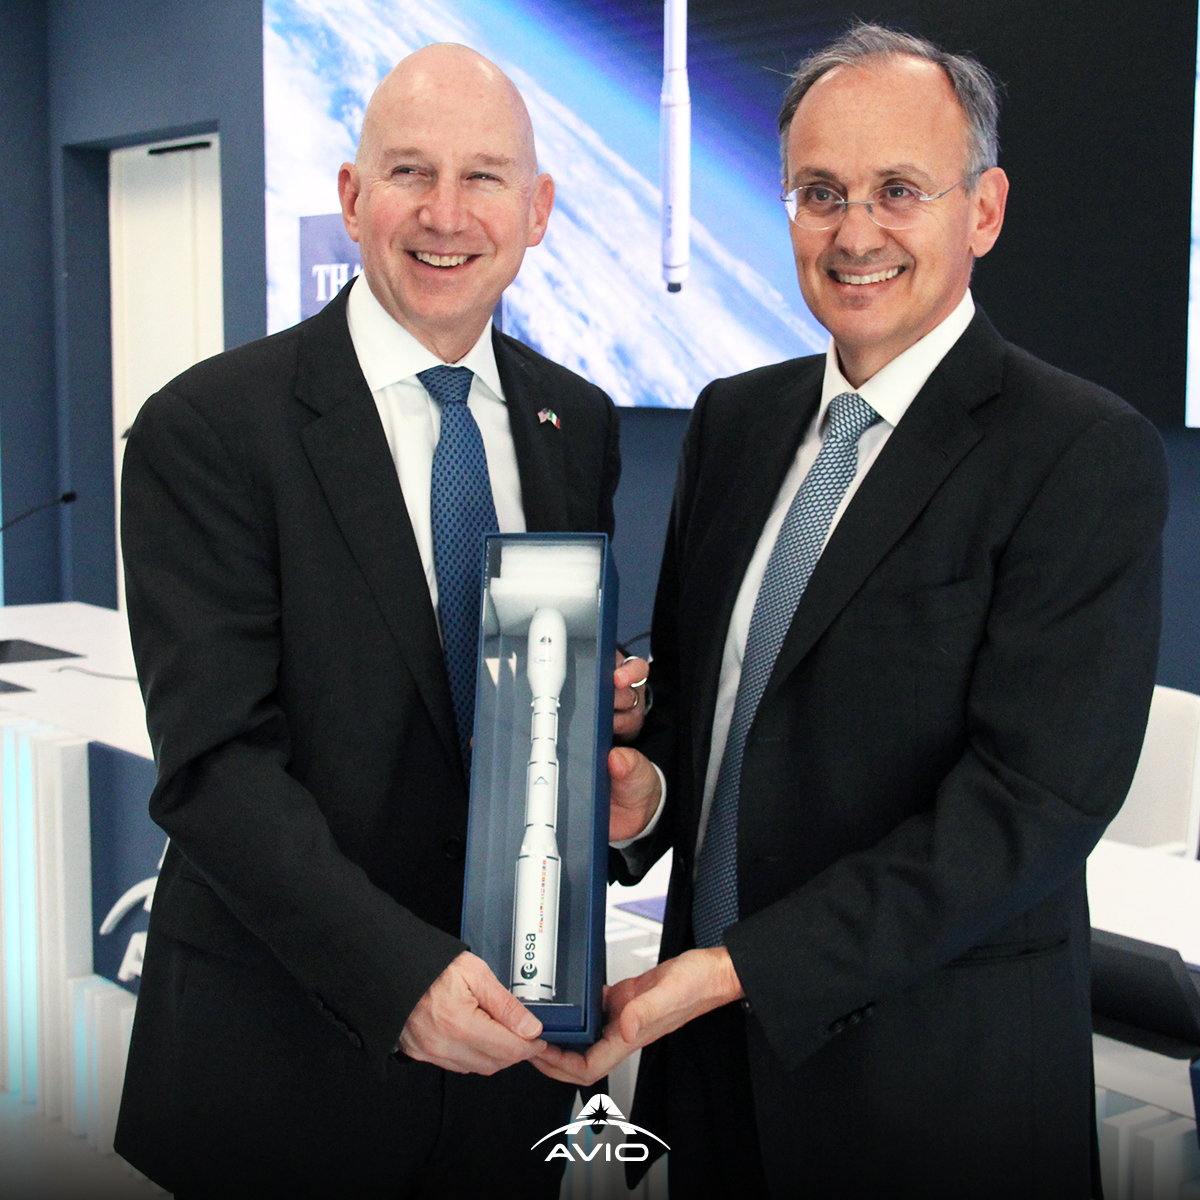 Yesterday the US Ambassador Jack Markell came to visit our headquarter in Colleferro. It was a great pleasure to welcome him and talk about current scenarios and new opportunities in the #Space Industry. #Avio #spaceiscloser @USAmbItaly